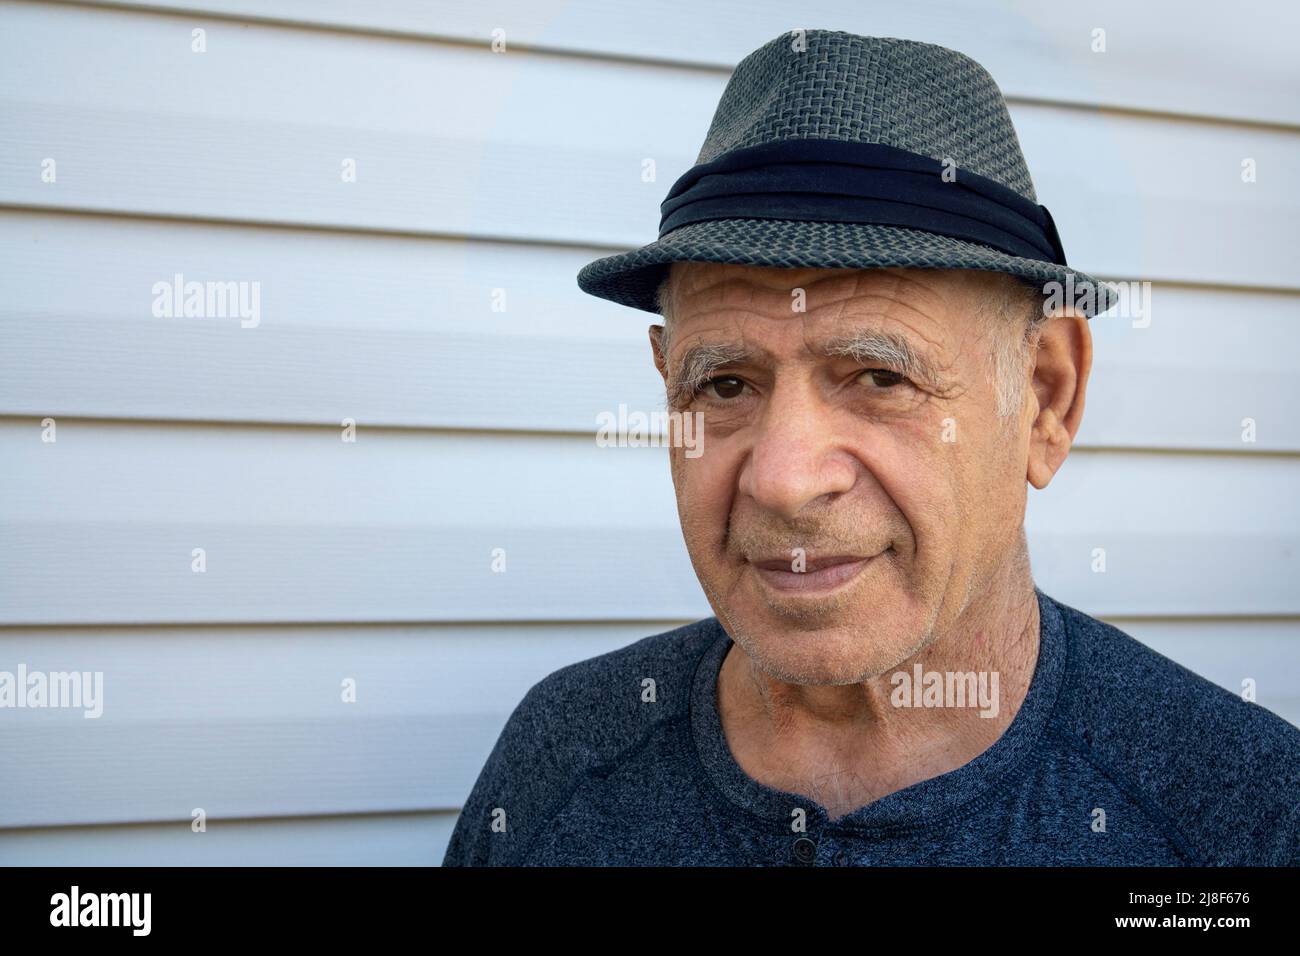 caucasian male senior adult with a fedora hat in front of an exterior white house wall Stock Photo